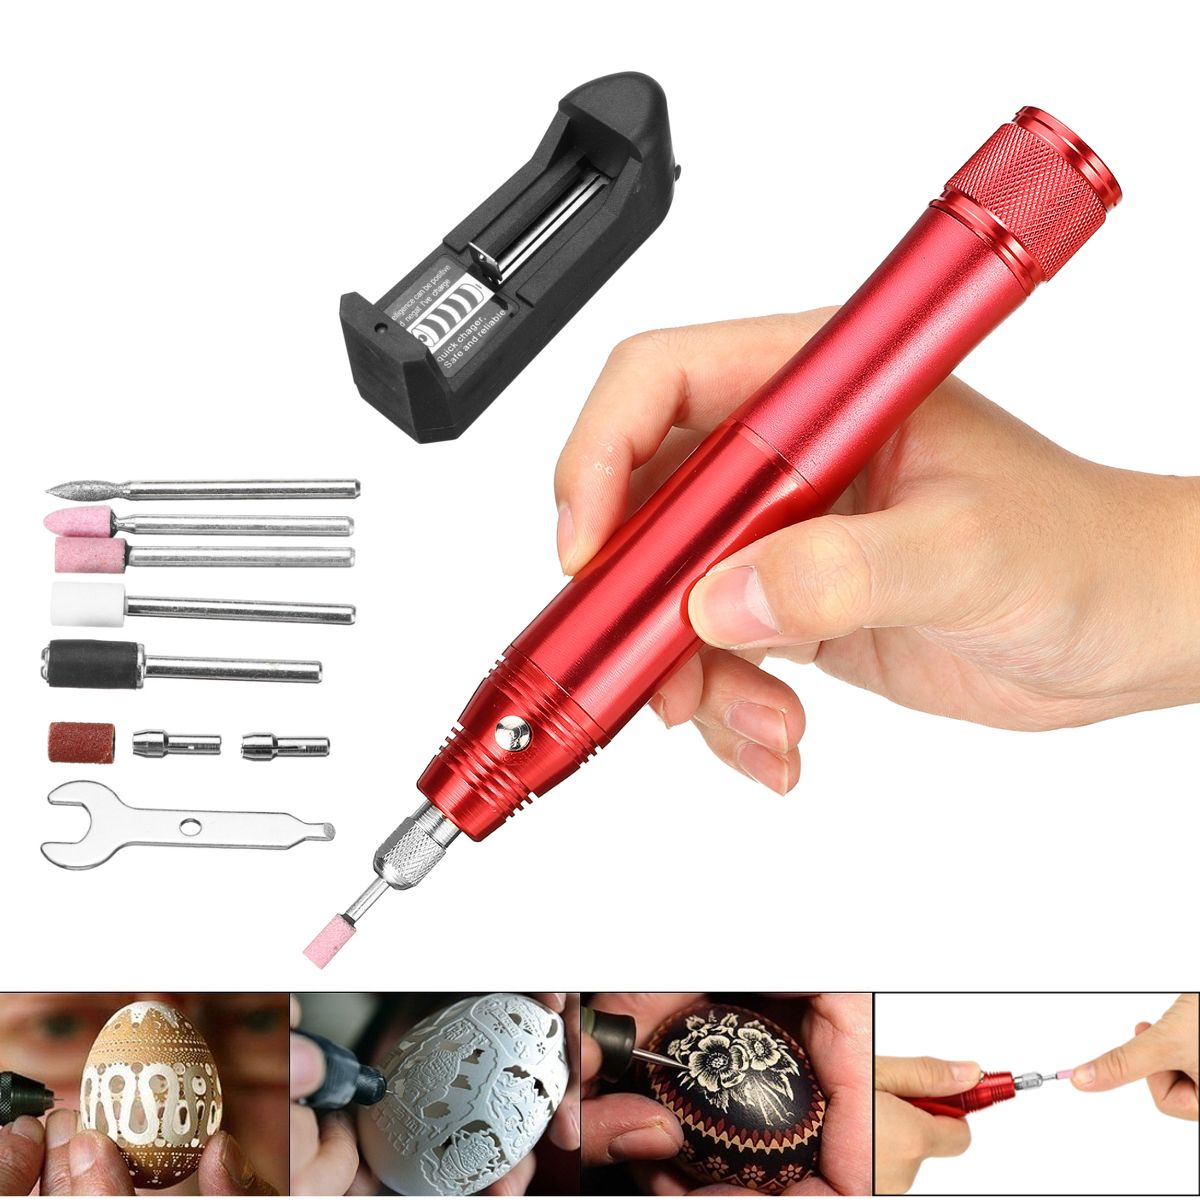 Mini-Wireless-Electric-Engraving-Pen-Portable-Nail-Polisher-Grinder-Drill-Machine-with-5-Grinding-He-1553751